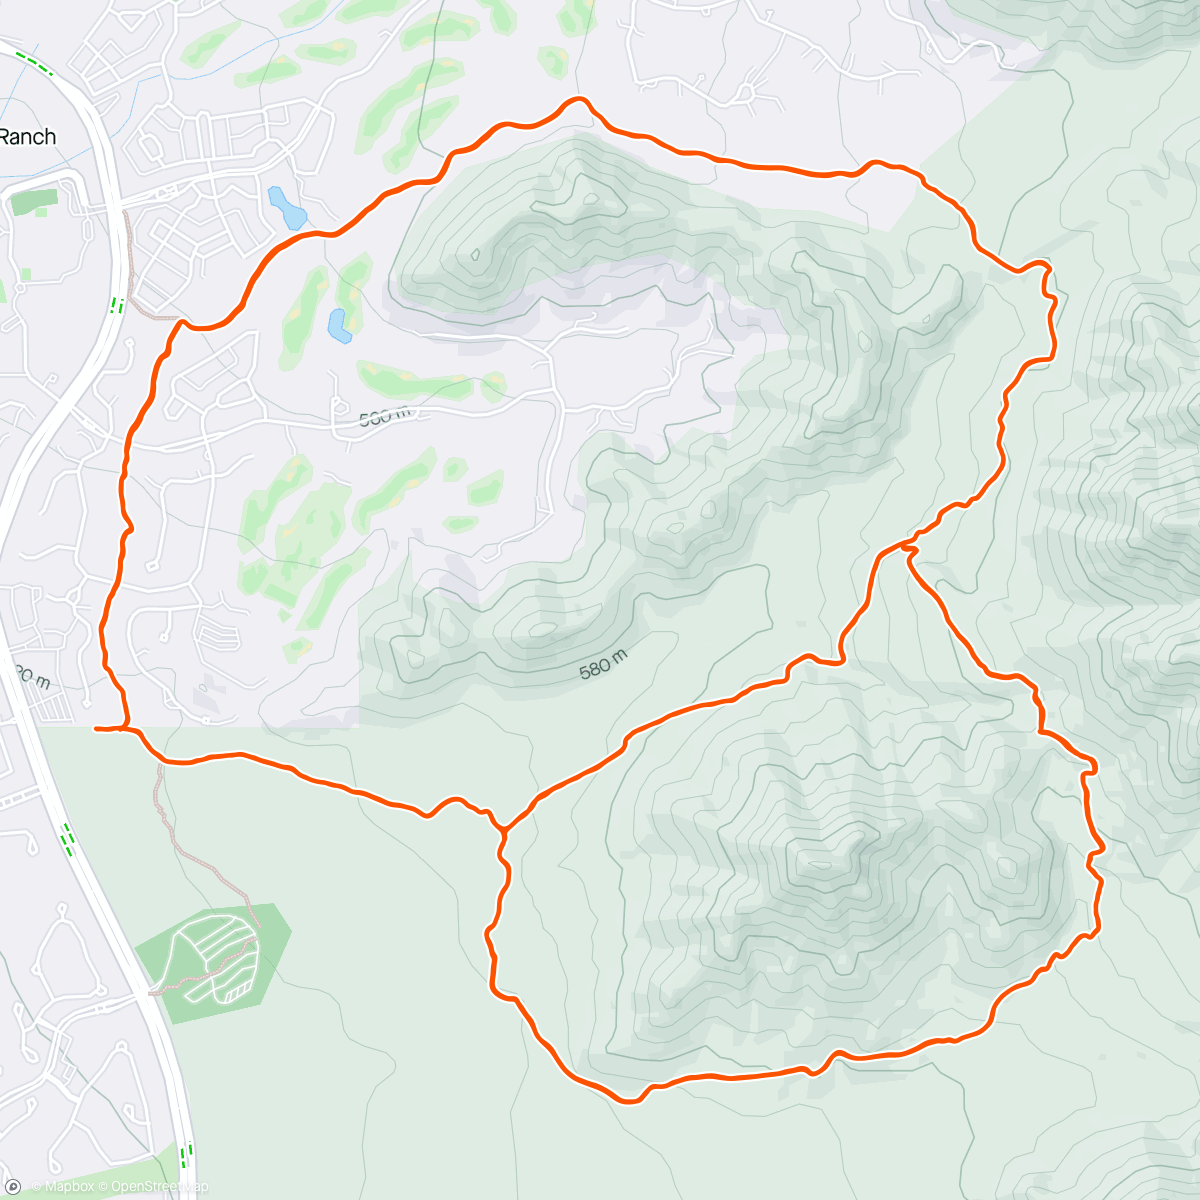 Mapa de la actividad, Absolute amazing solo ride at McDowells. I Absolutely love these trails!!! Gotta get it in before it's too hot, but hot dam that was a good ride 🤙🤙💪💪😎😎💯💯🔥🔥❤️❤️